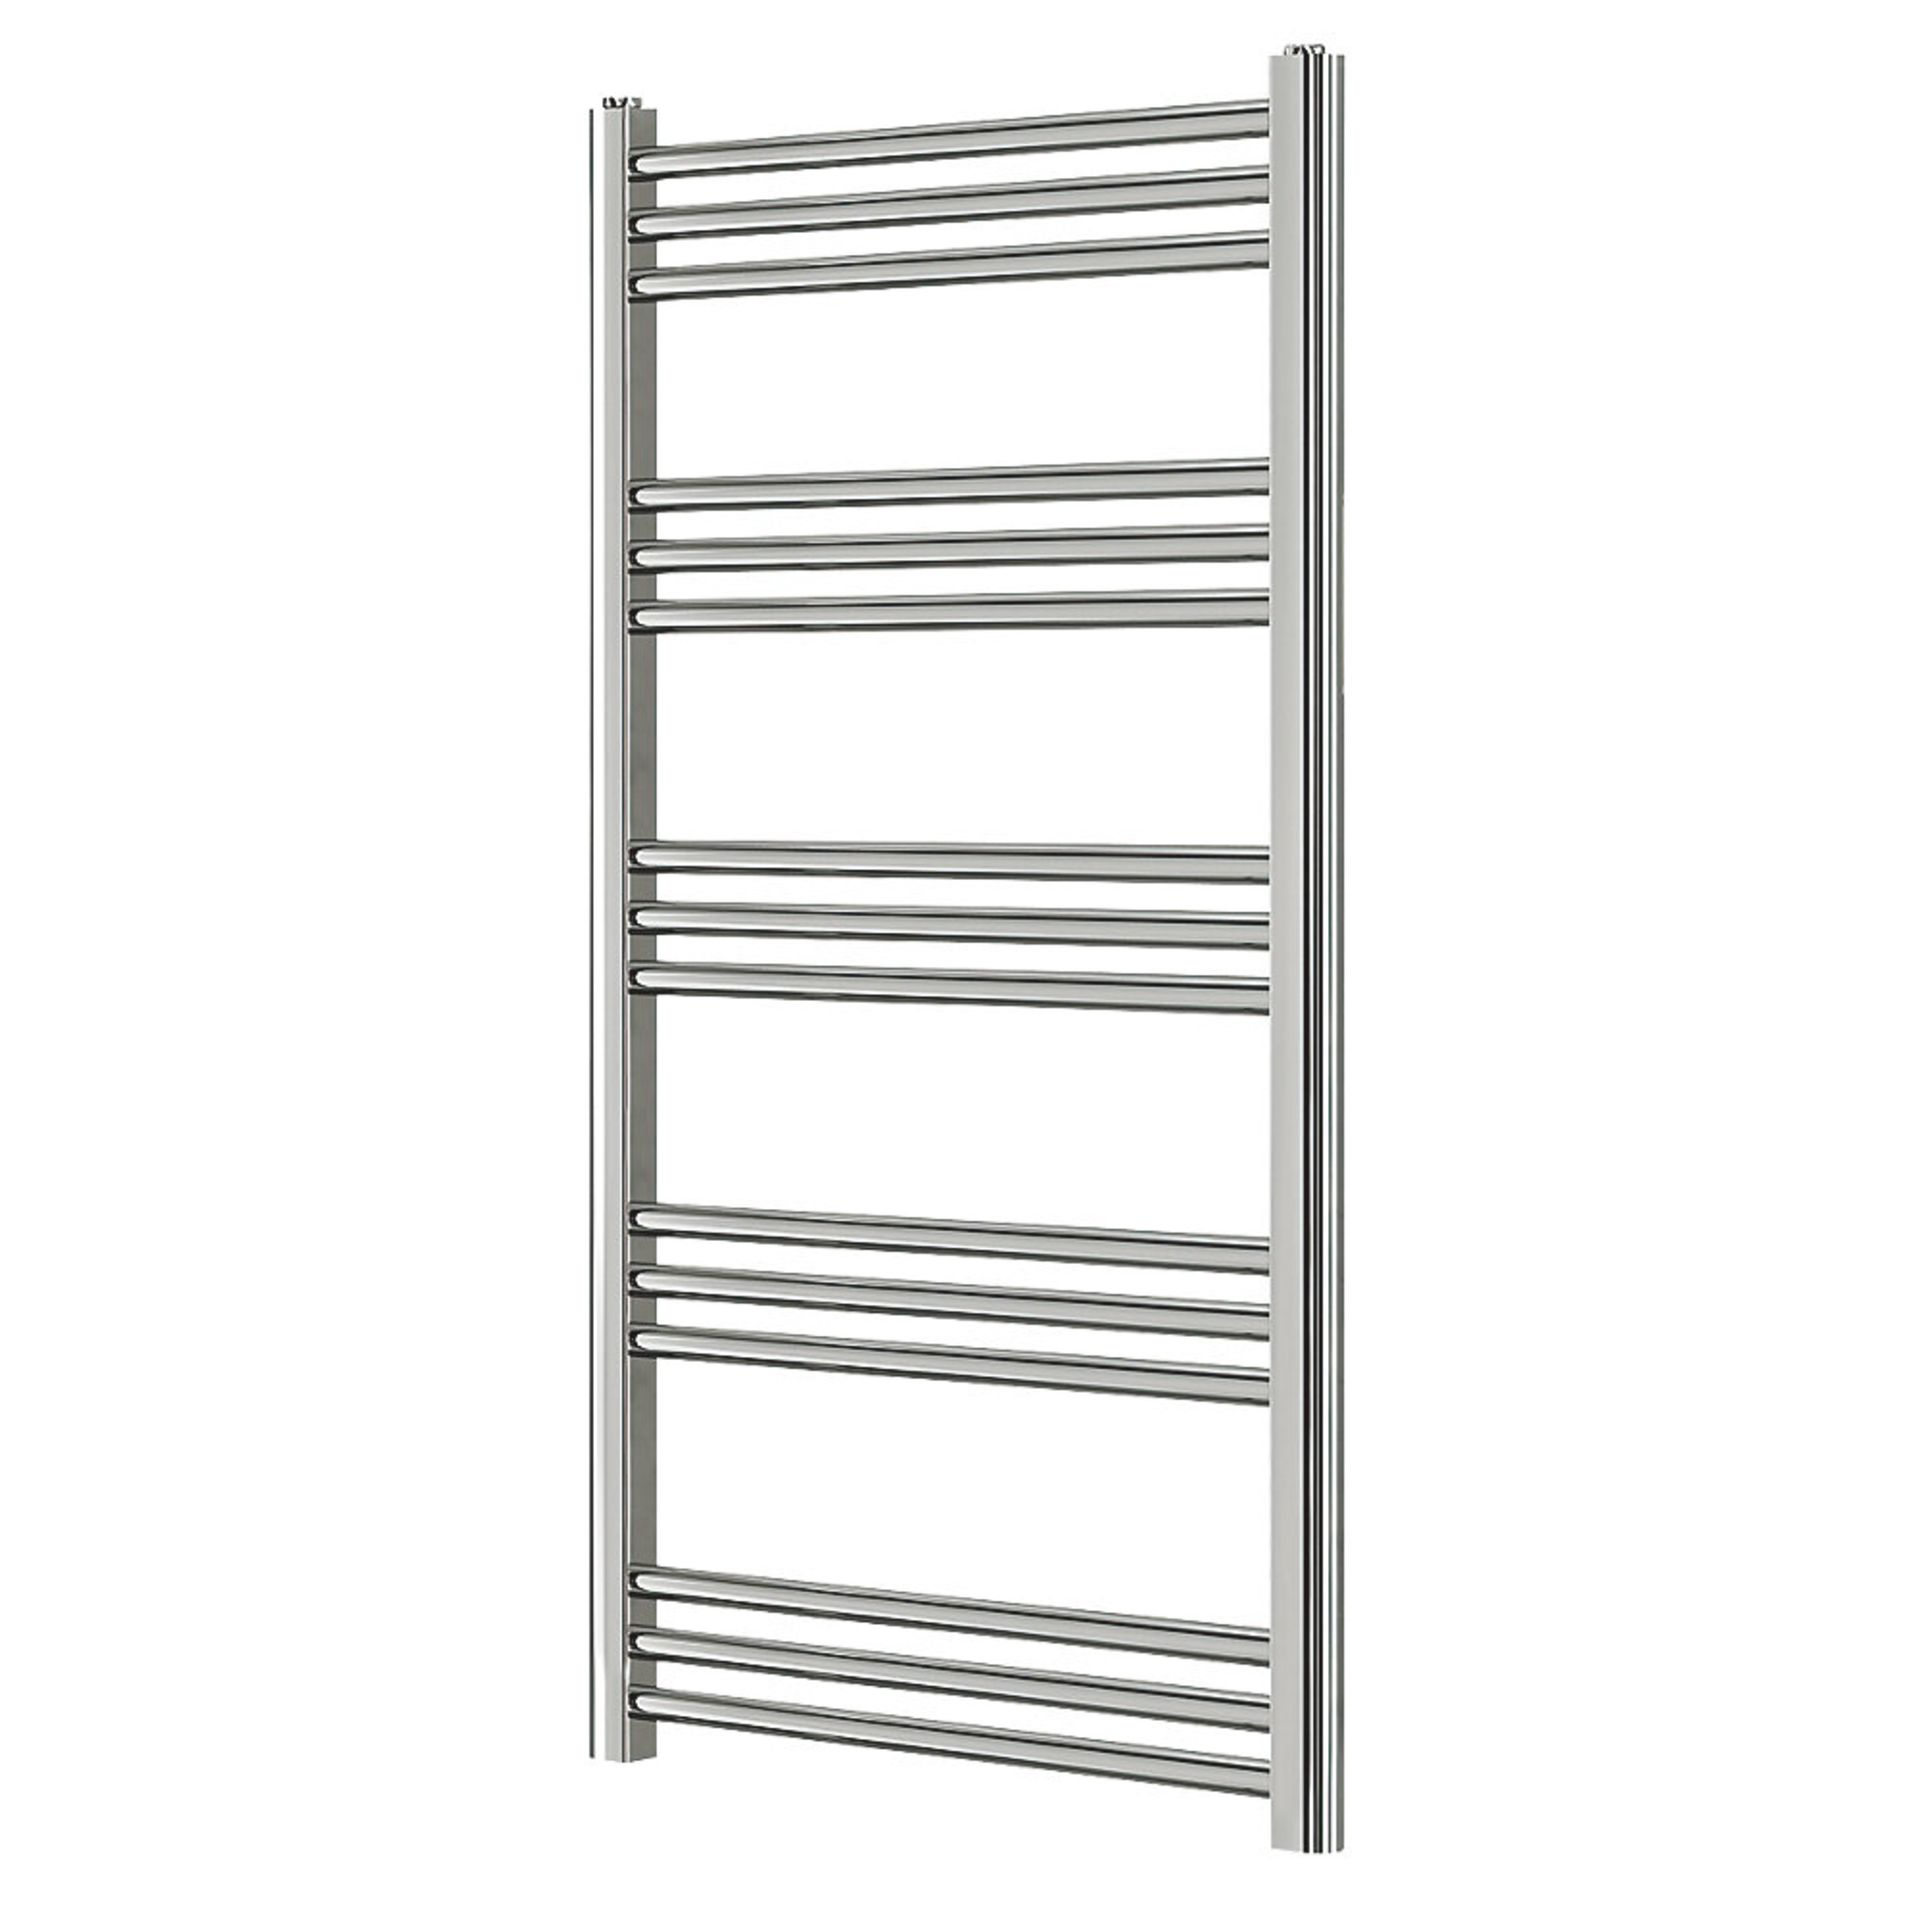 (SA149) 1100 X 500MM TOWEL RADIATOR CHROME. Mild steel construction with a gloss chrome finish. This - Image 5 of 7